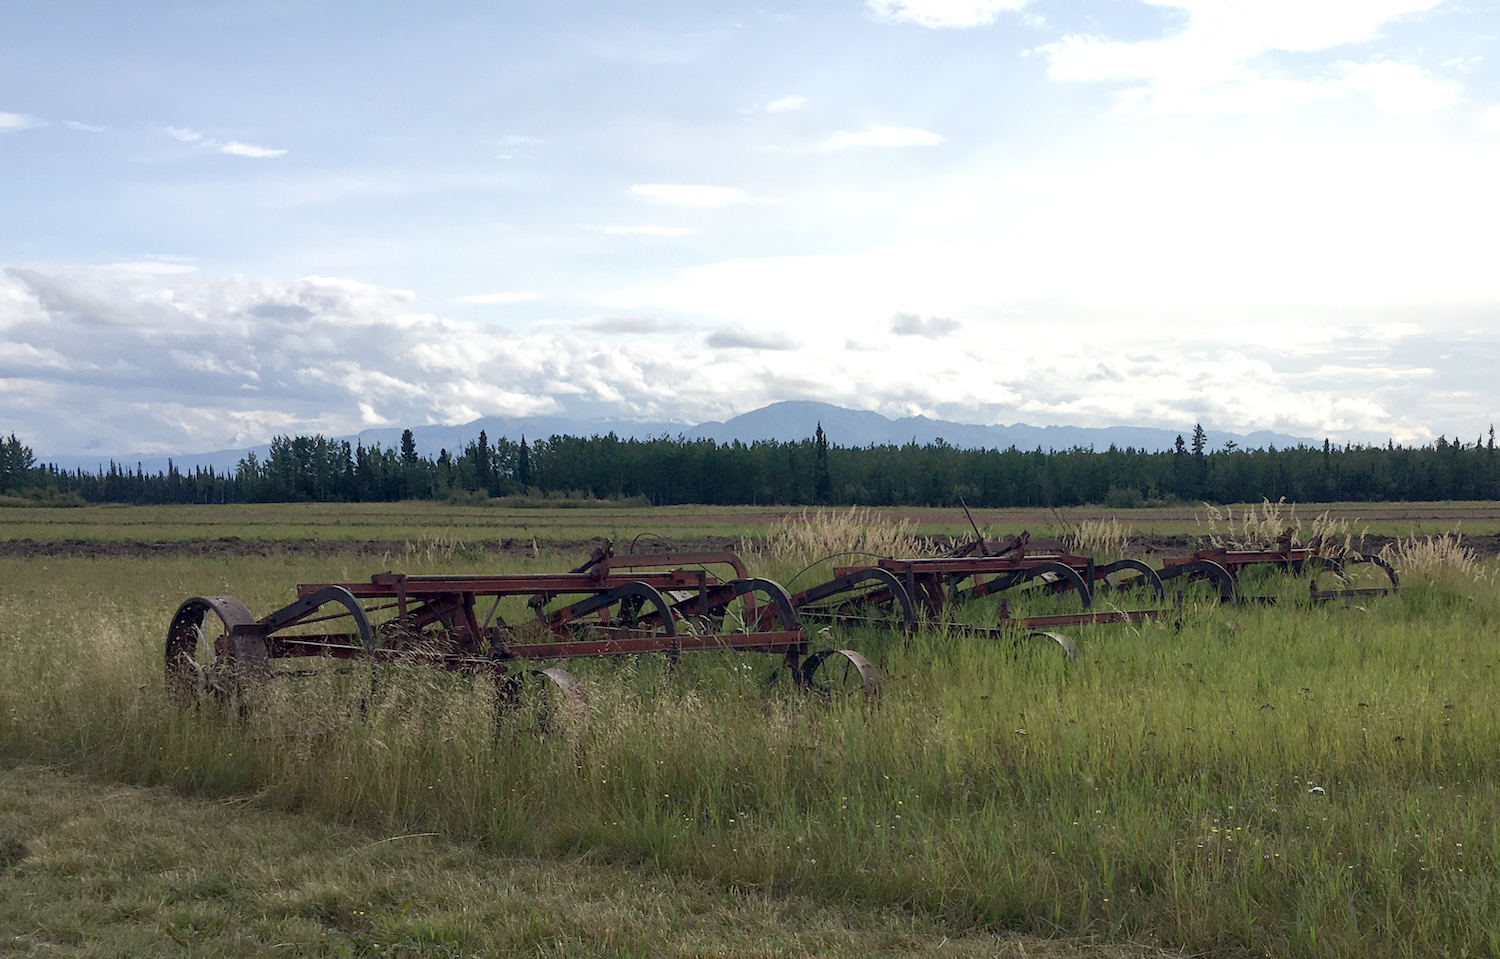 Old farm equipment sits in a field, with evergreen trees and mountains in the background.